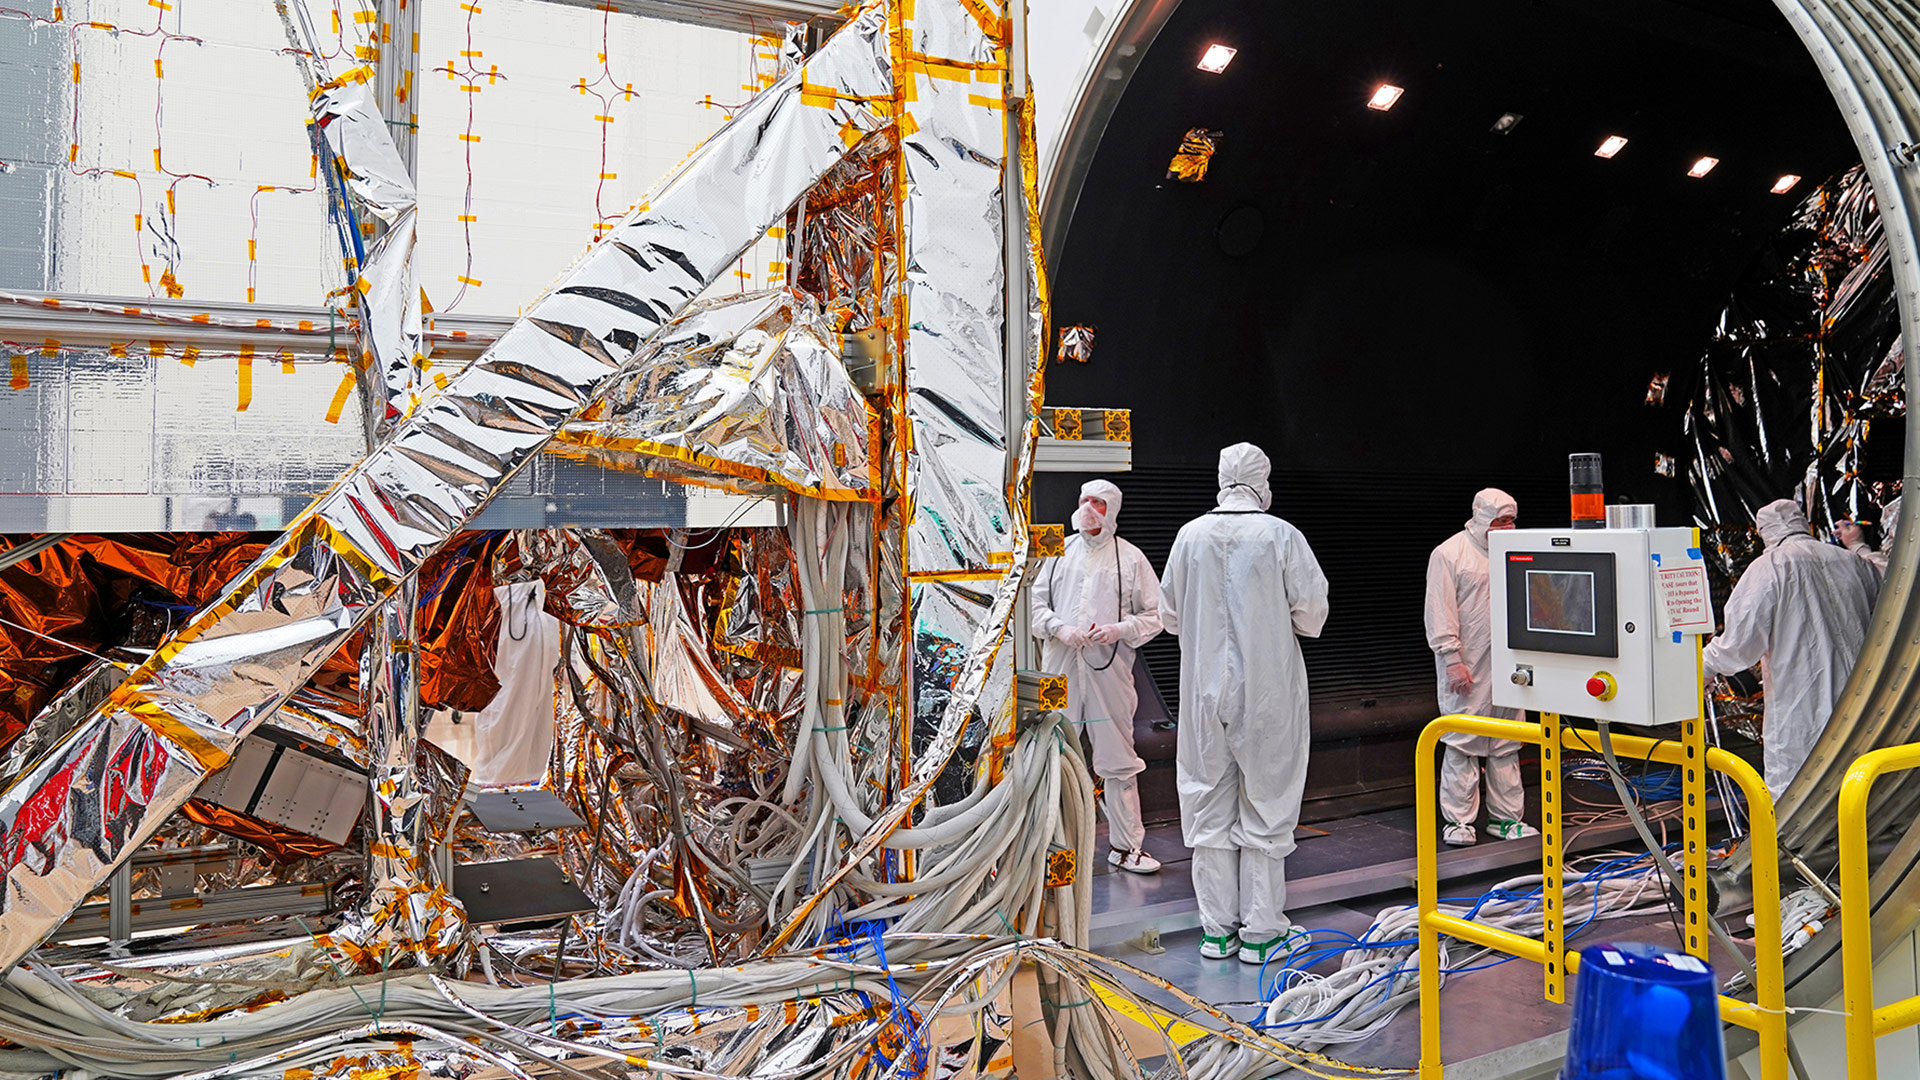 technicians dressed in bynnysuits building a satellite in cleanroom